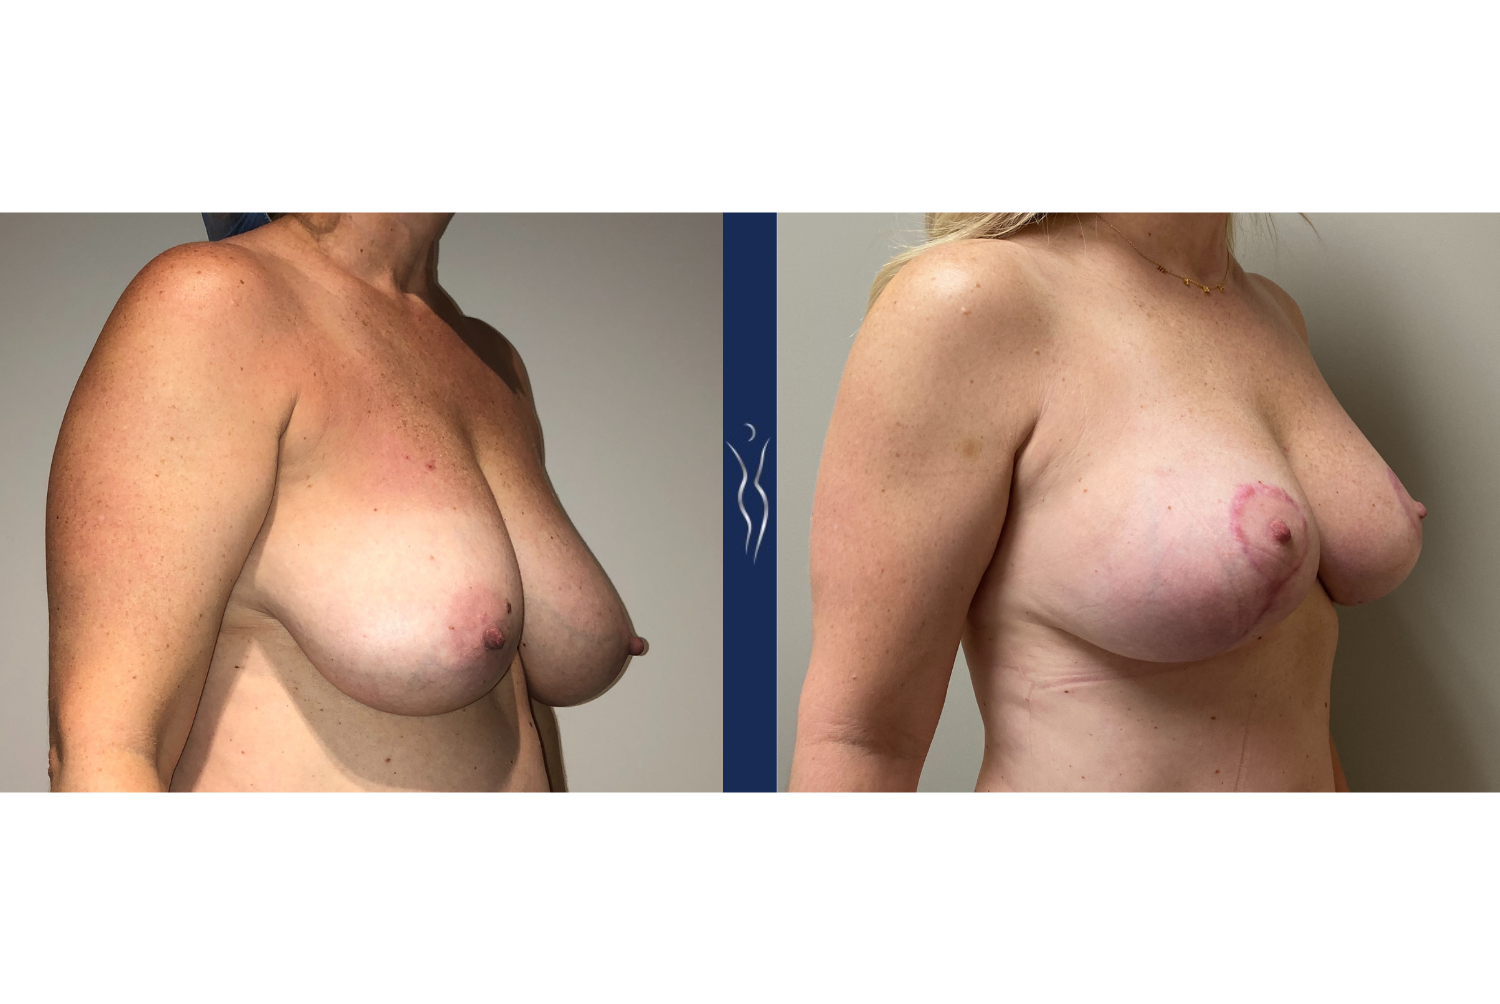 46 year old lady breast augmentation with lift right oblique 3 months